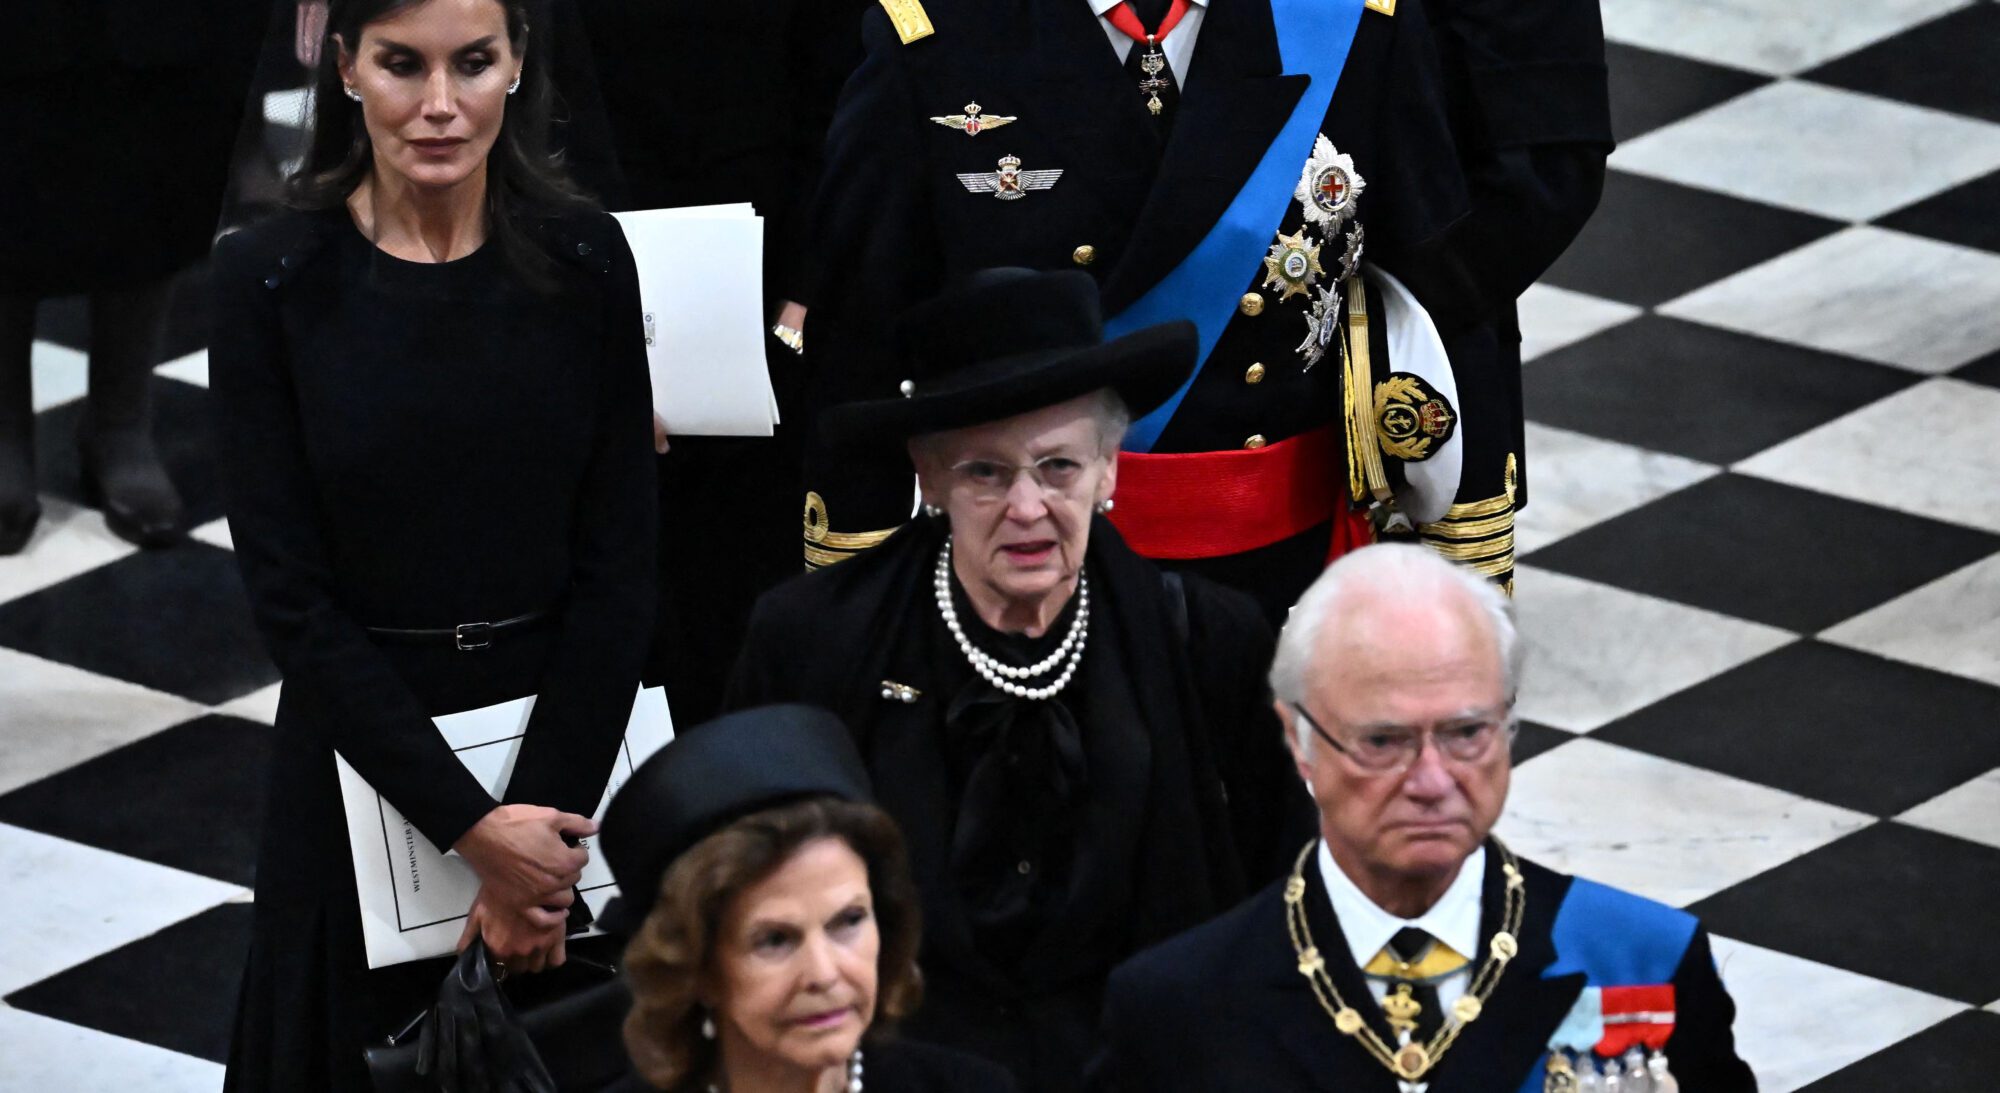 Denmark's Queen Margrethe II was surrounded by other royals at Queen Elizabeth's funeral, including Sweden's Queen Silvia (lower left), Sweden's King Carl Gustav XVI (lower right) and Spain's Queen Letizia 